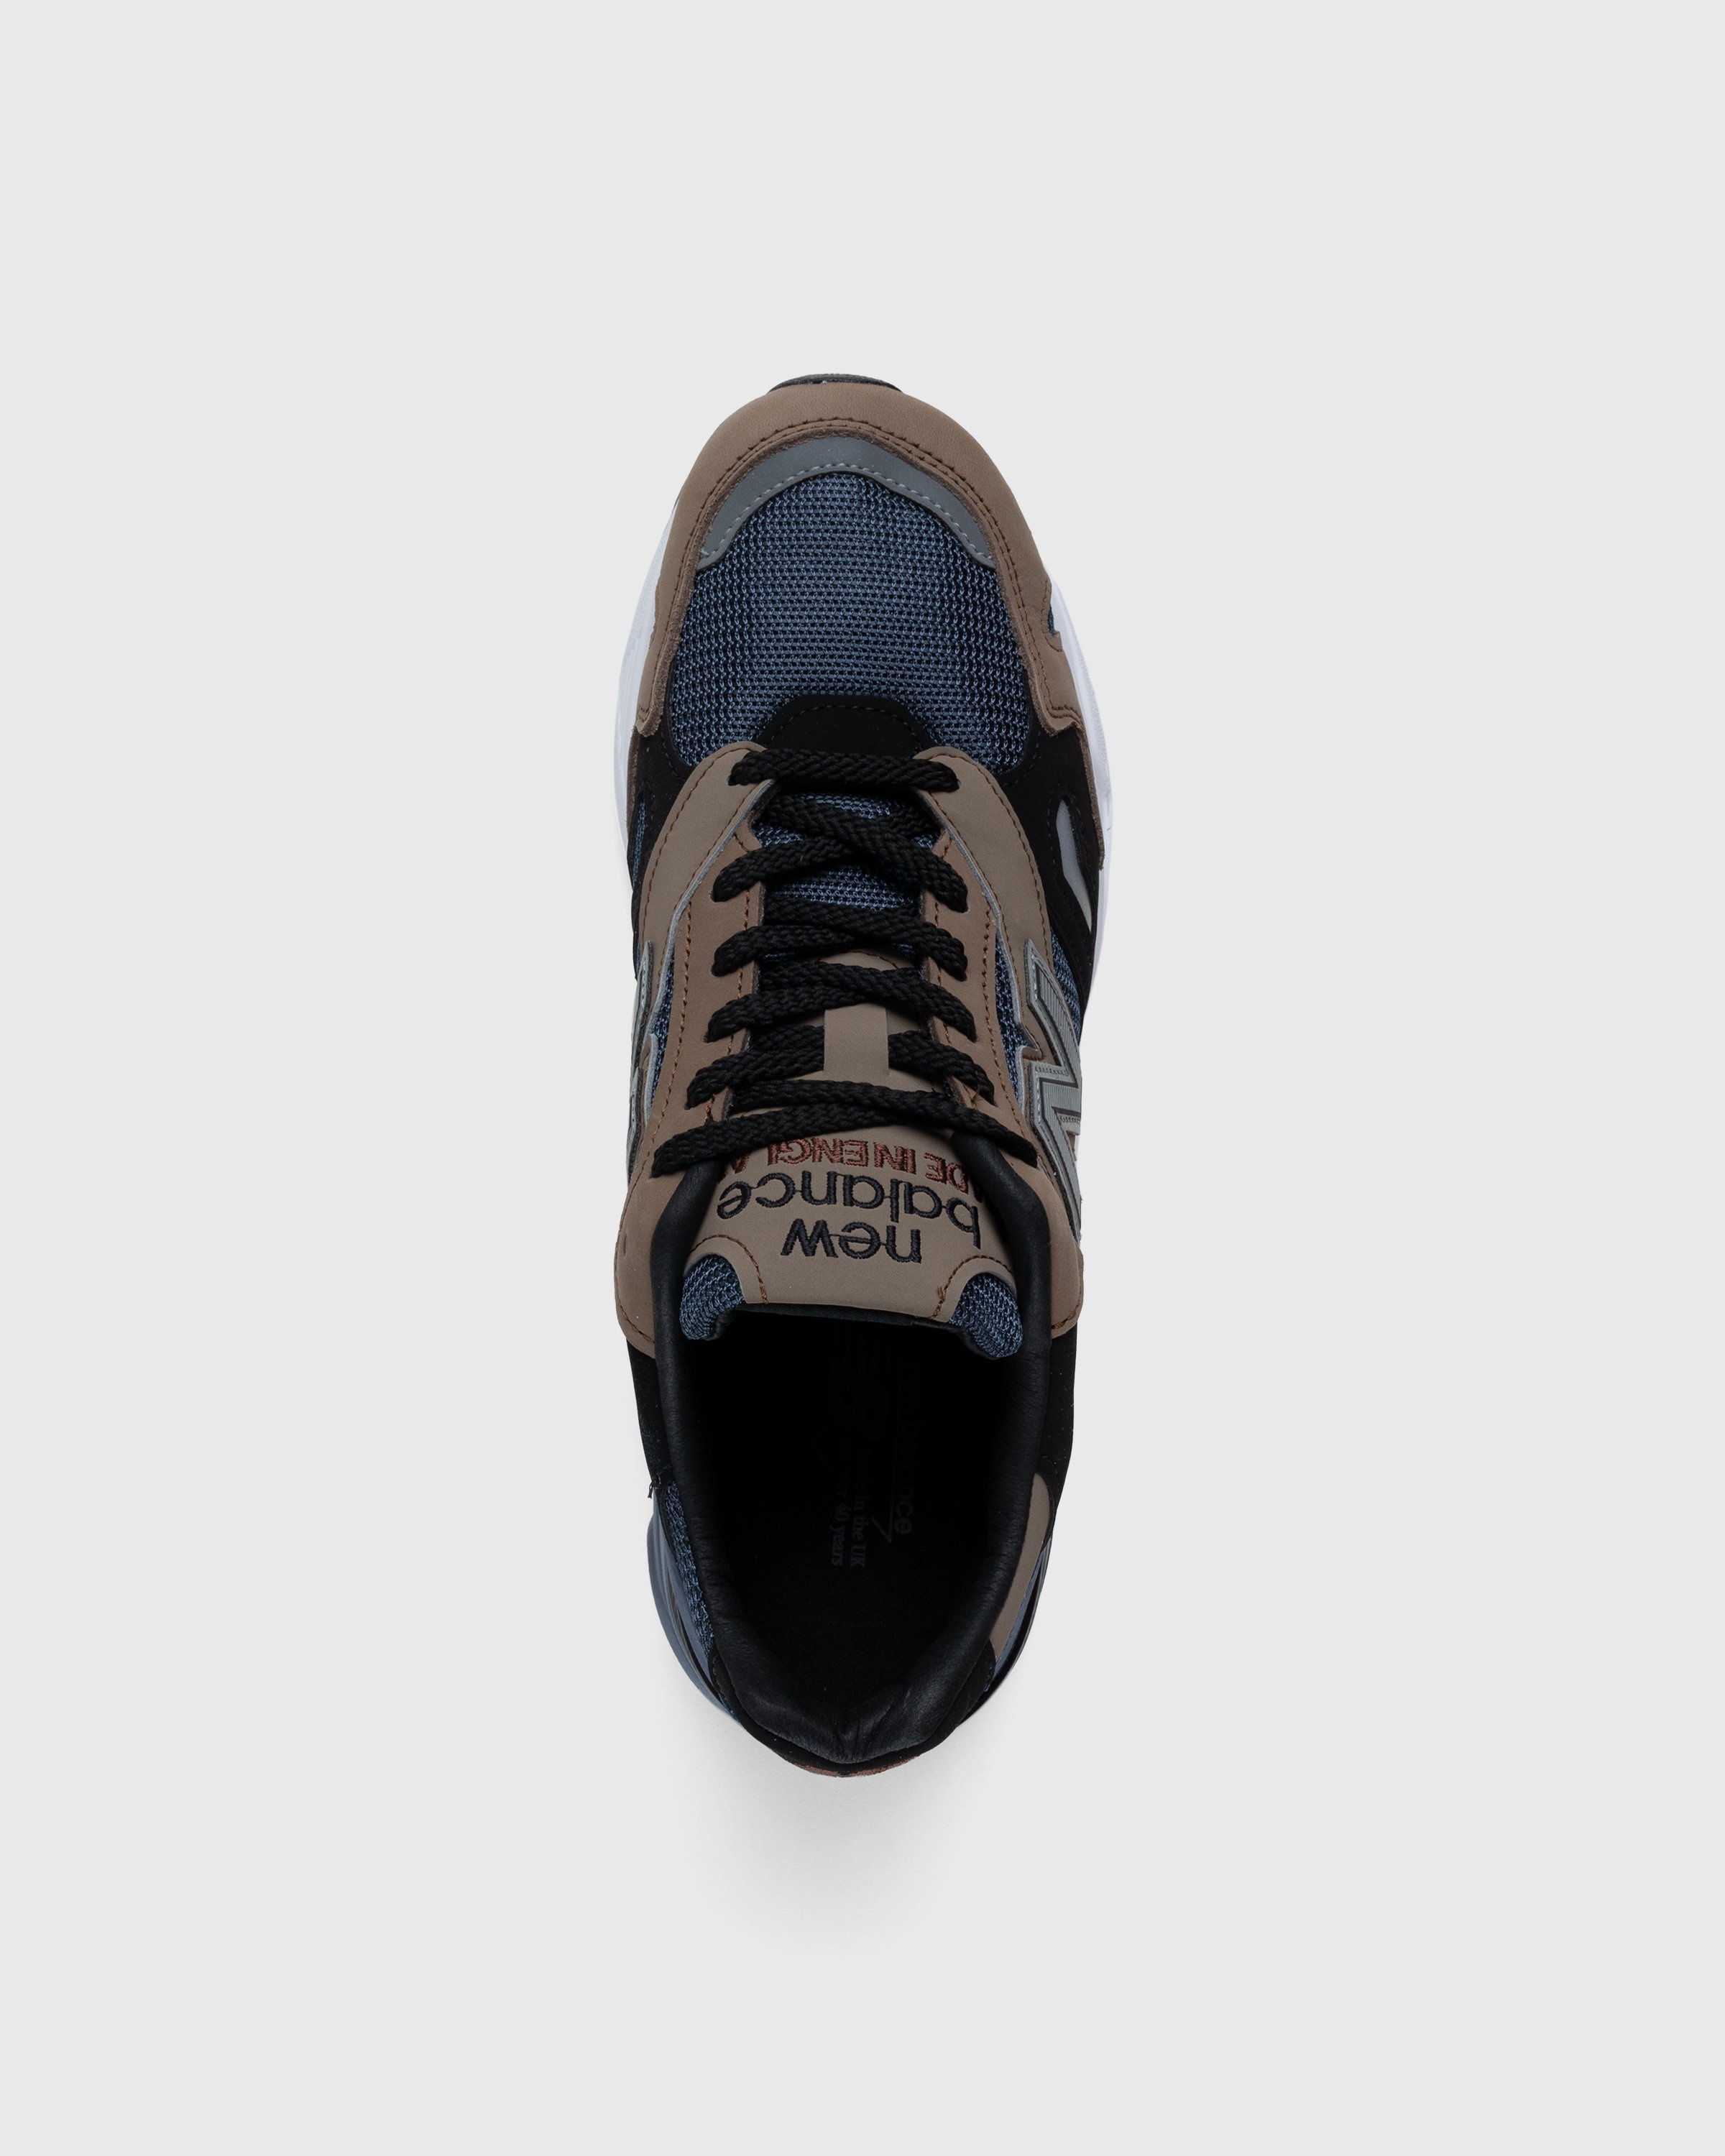 New Balance – M920INV Navy/Black - Low Top Sneakers - Blue - Image 5